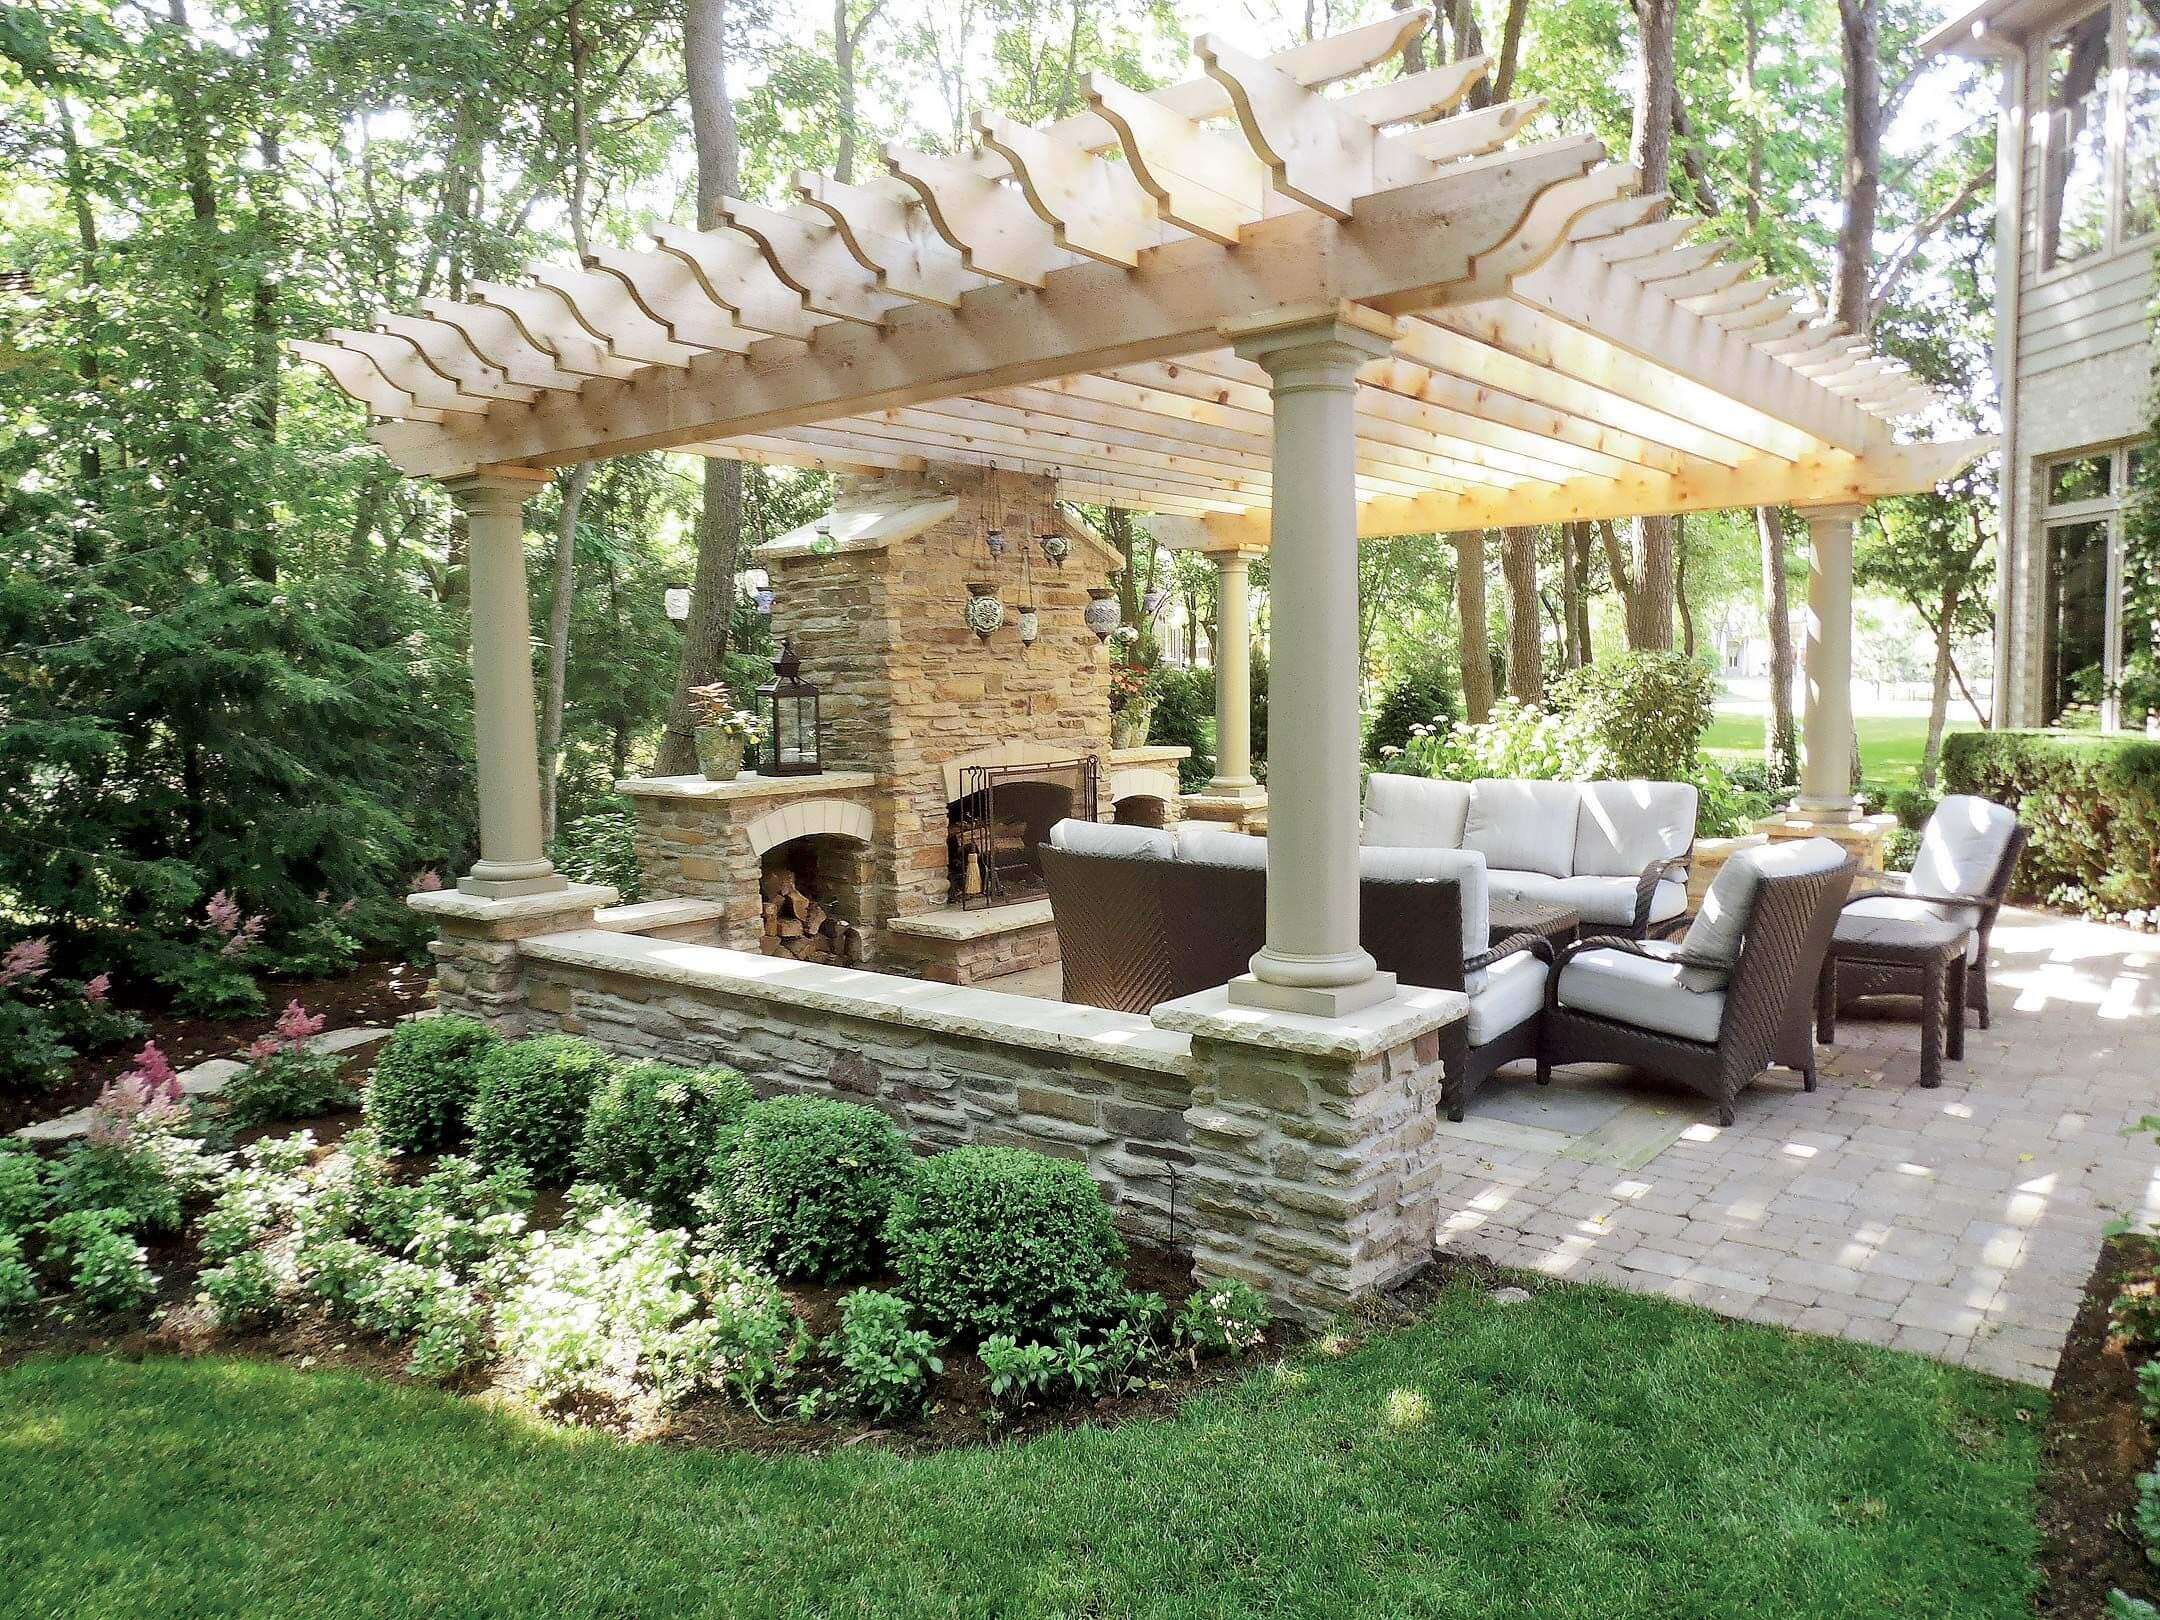 Know About How Well Do Pergolas Provide Shade?